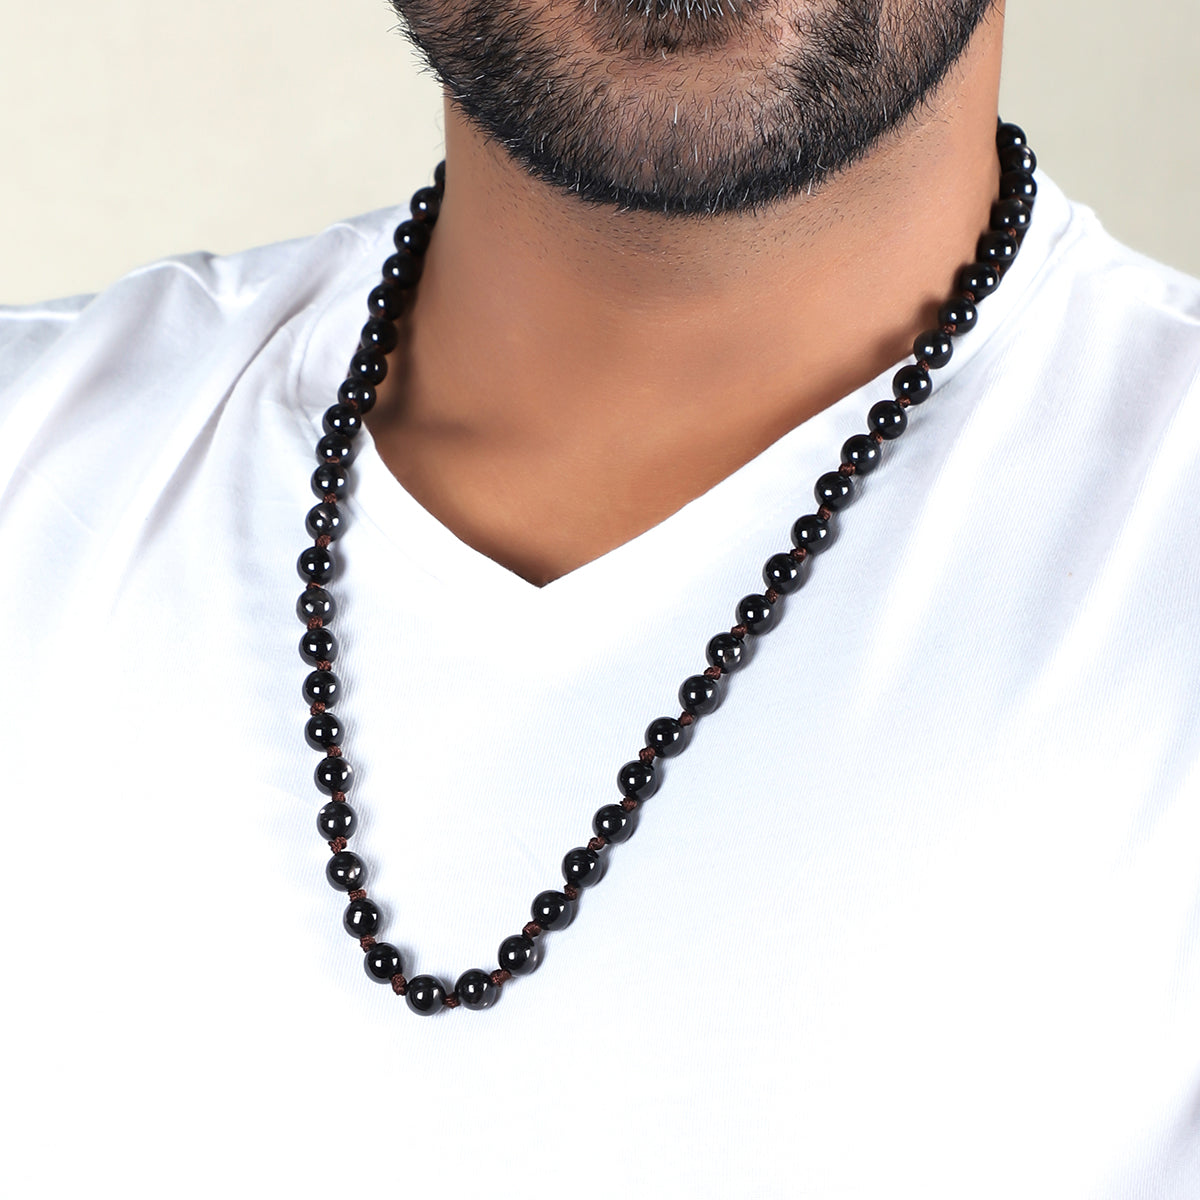 Stainless Steel Mens Bead Necklace Natural Stone Necklaces Black Chokers  Jewelry | eBay